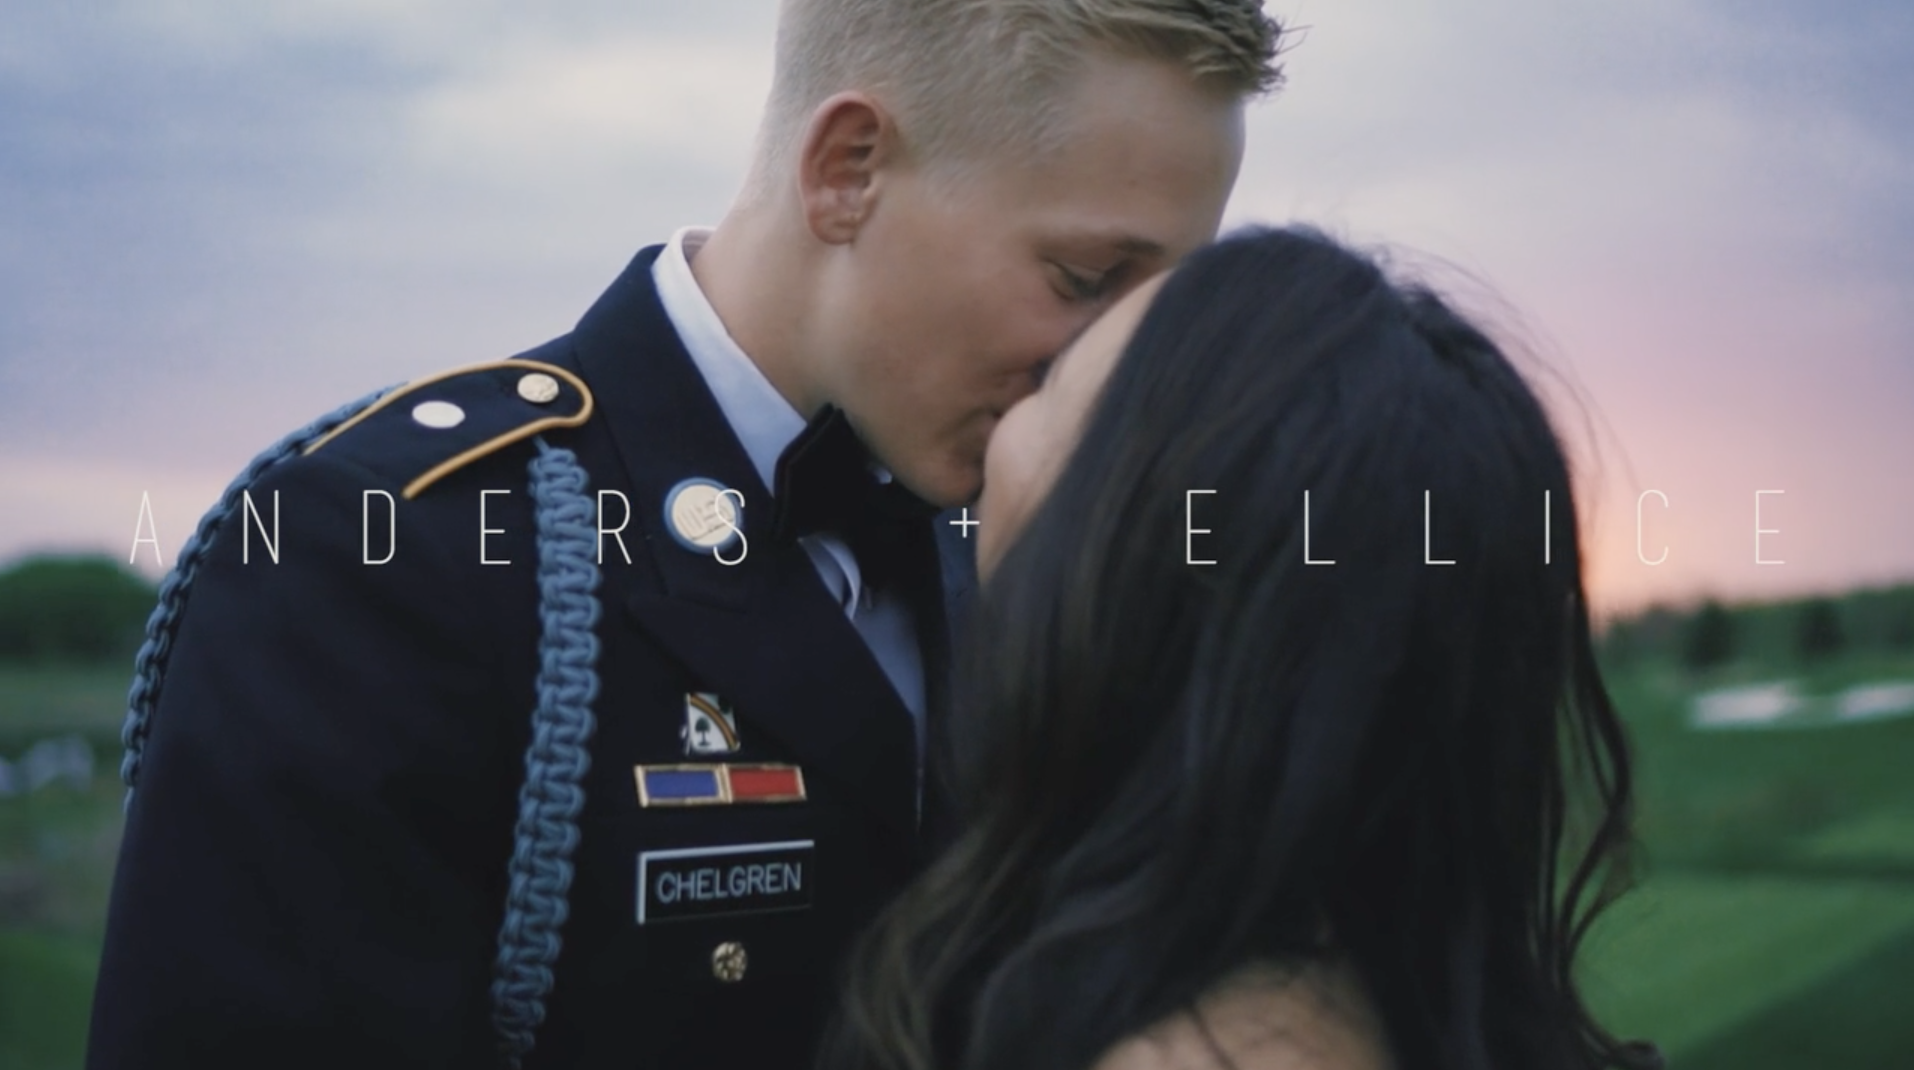 VIDEO: Military Groom Shares Emotional Vows